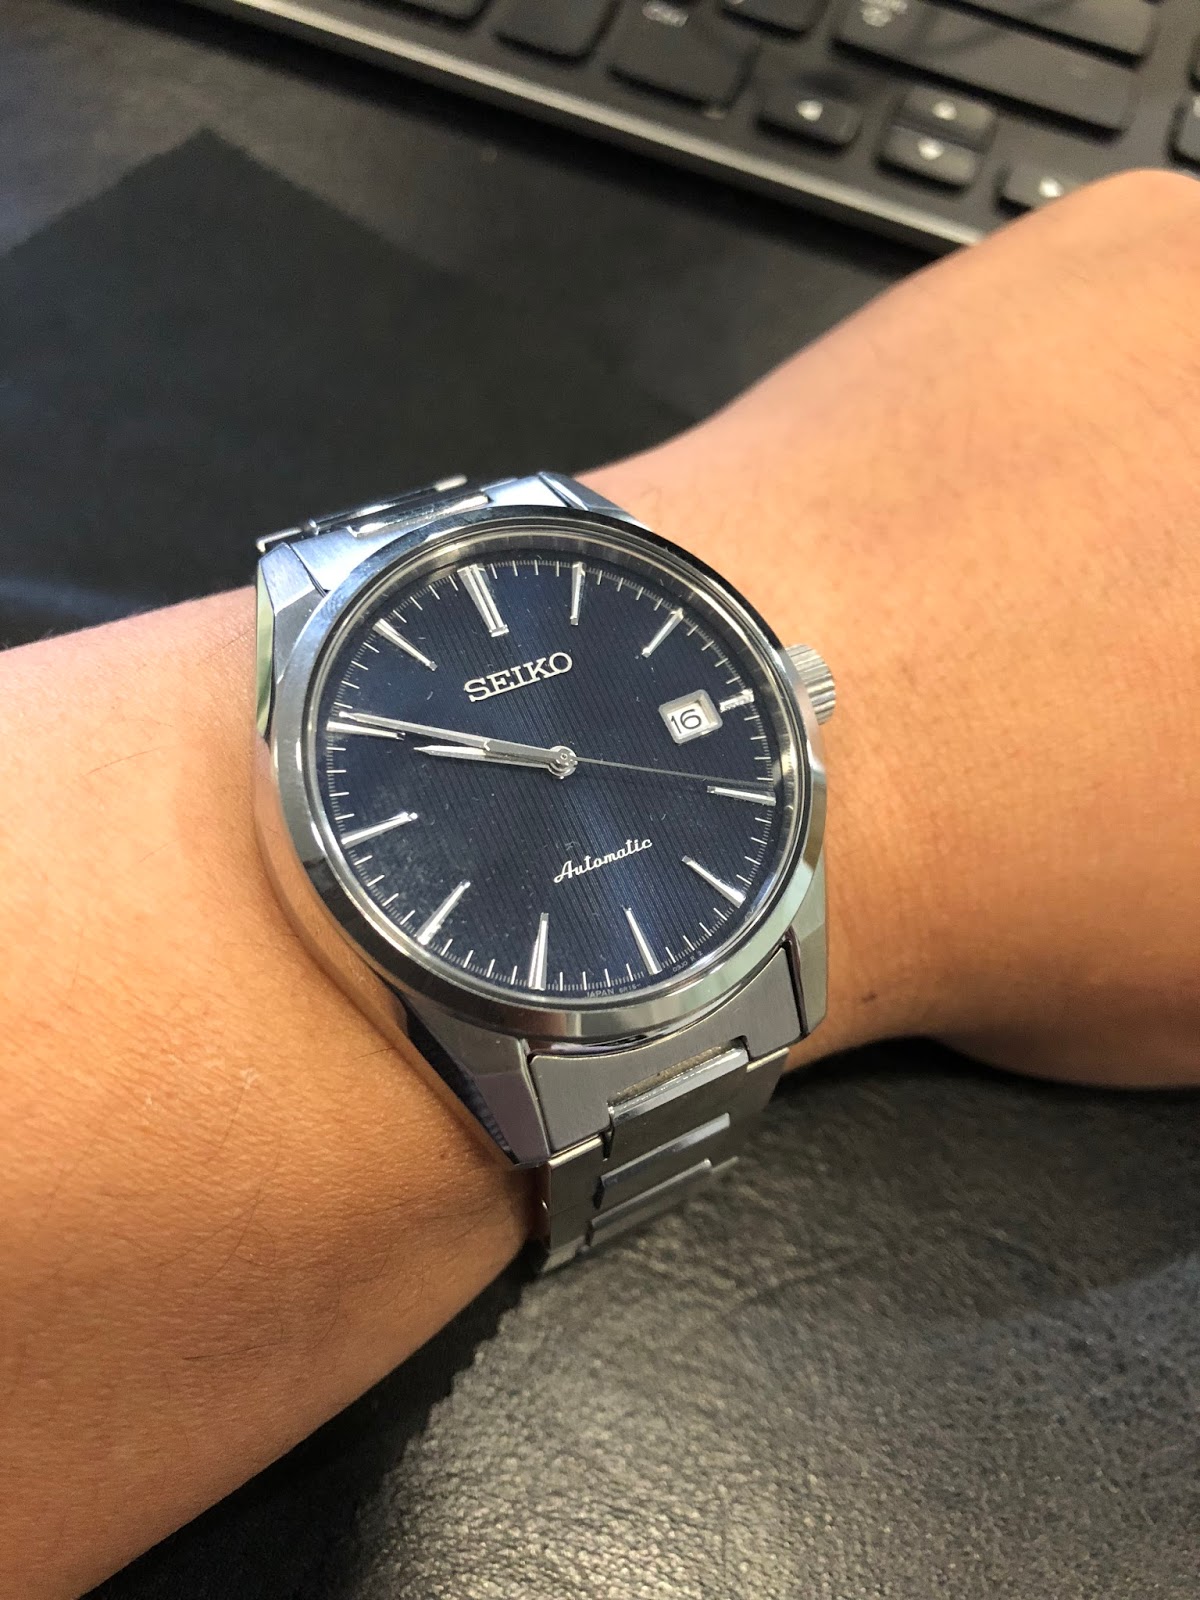 My Eastern Watch Collection: Presage Automatic Blue "Tuxedo" Ref. SARX045 - An Elegant Gentleman's Watch, A Review (plus Video)